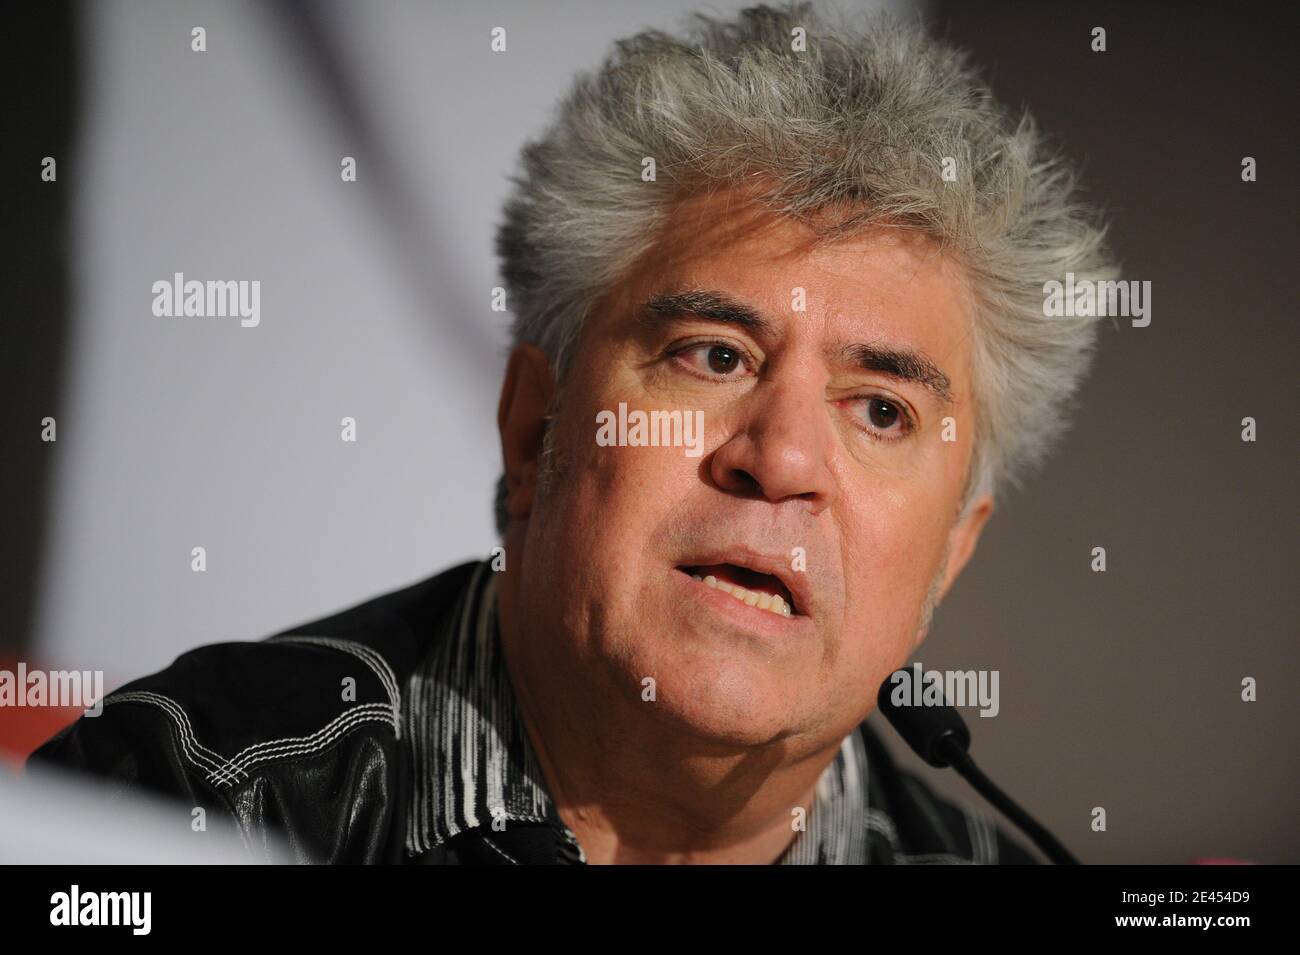 Pedro Almodovar attends the press conference of 'Los Abrazos Rotos' at the 62nd Cannes Film Festival in Cannes, France, May 19, 2009. Photo by Lionel Hahn/ABACAPRESS.COM Stock Photo